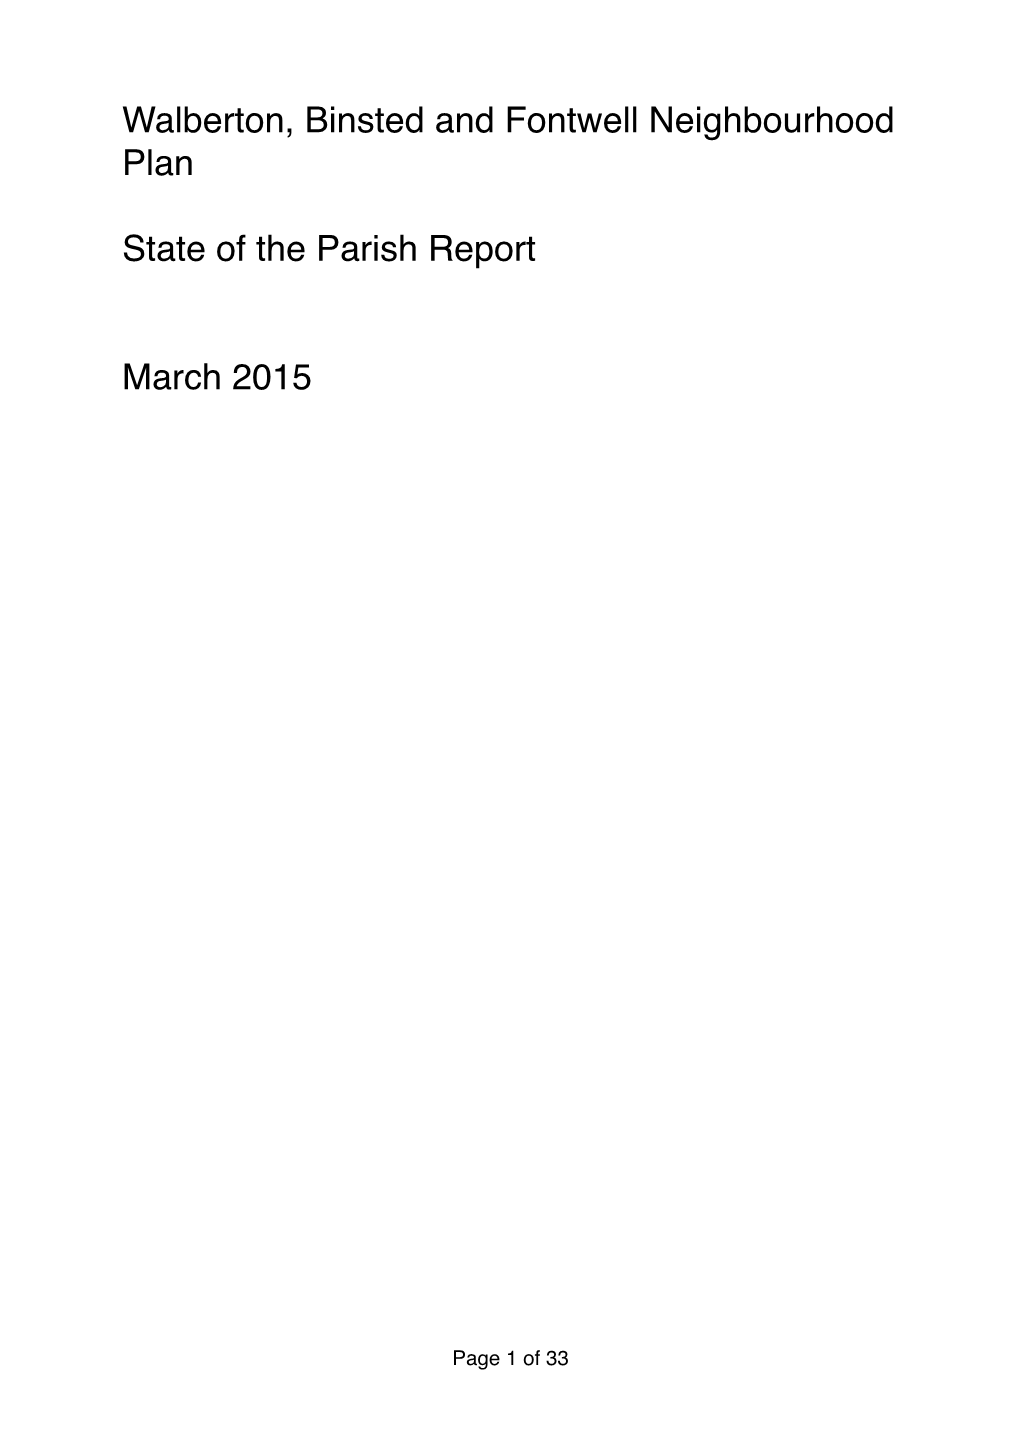 Walberton, Binsted and Fontwell Neighbourhood Plan State of the Parish Report March 2015